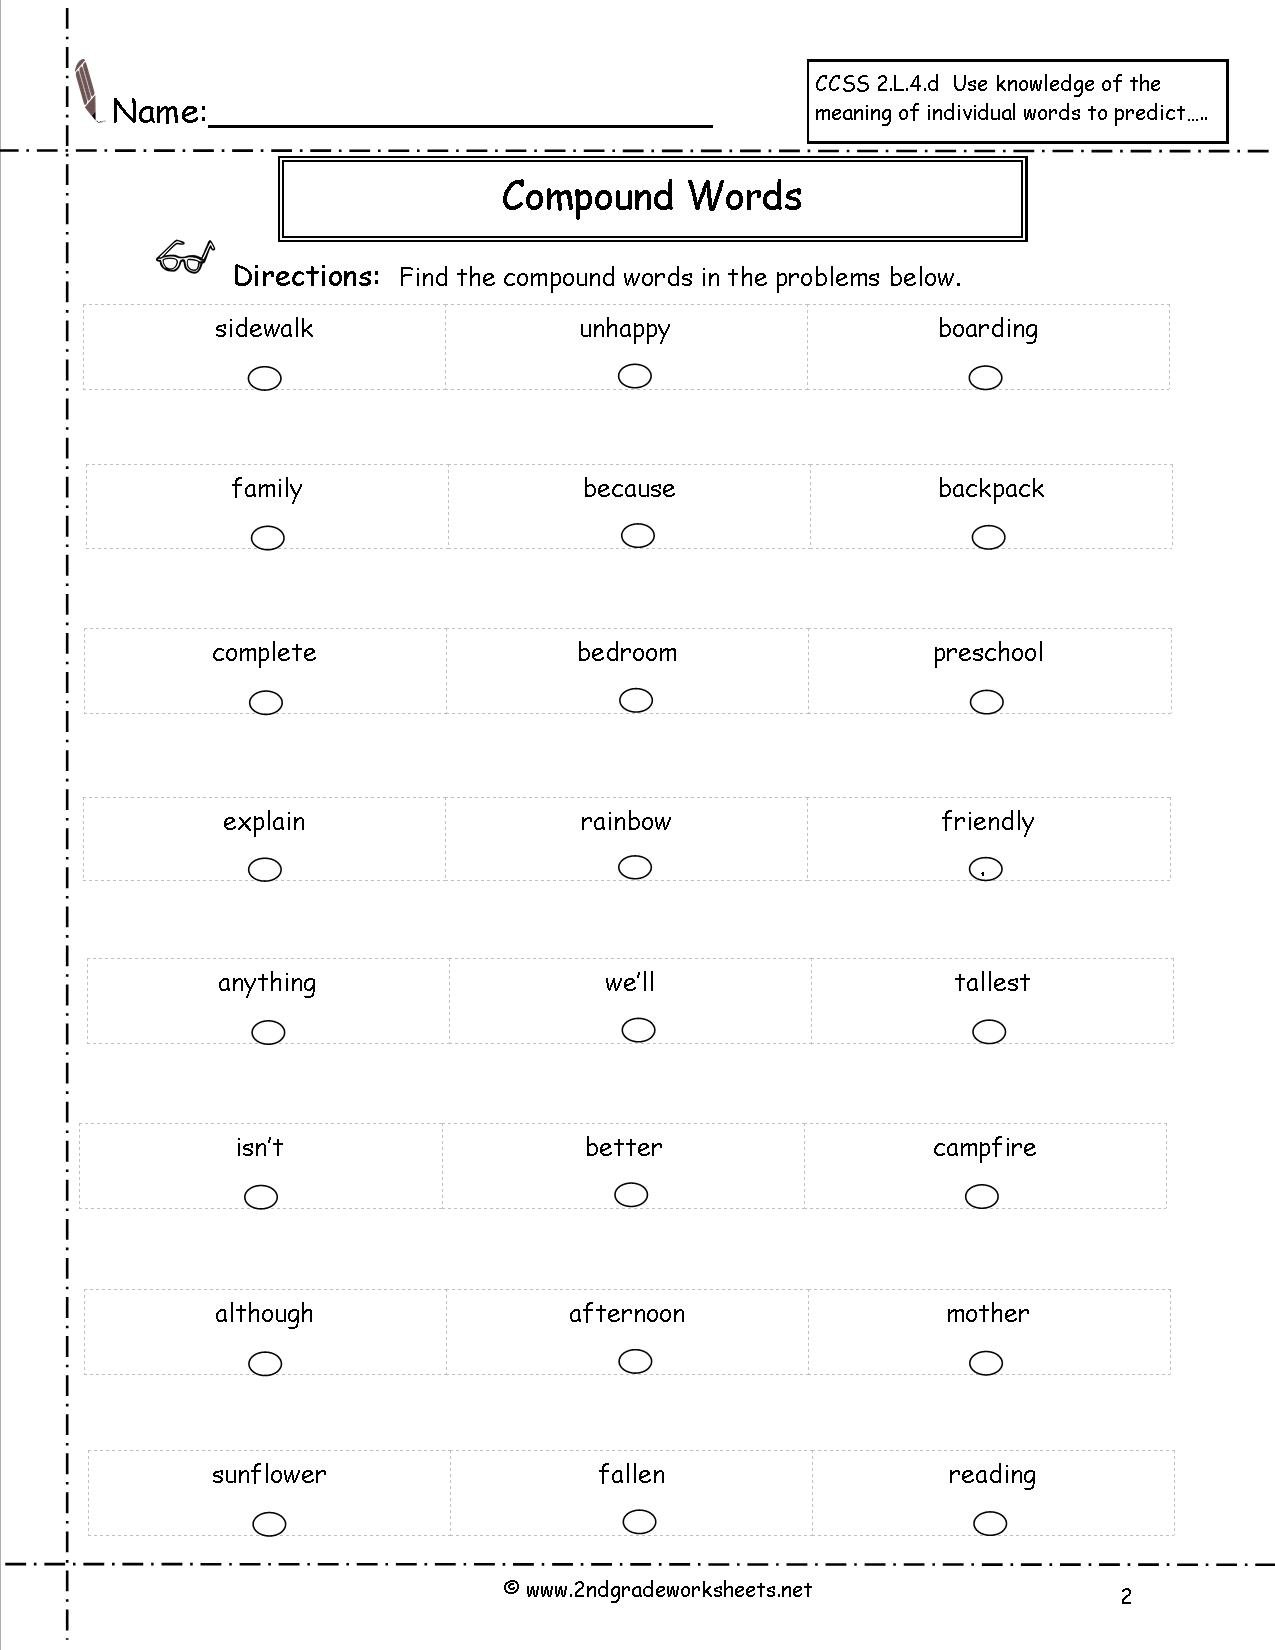 Compound Words Worksheets For Common Core Vocabulary Worksheets